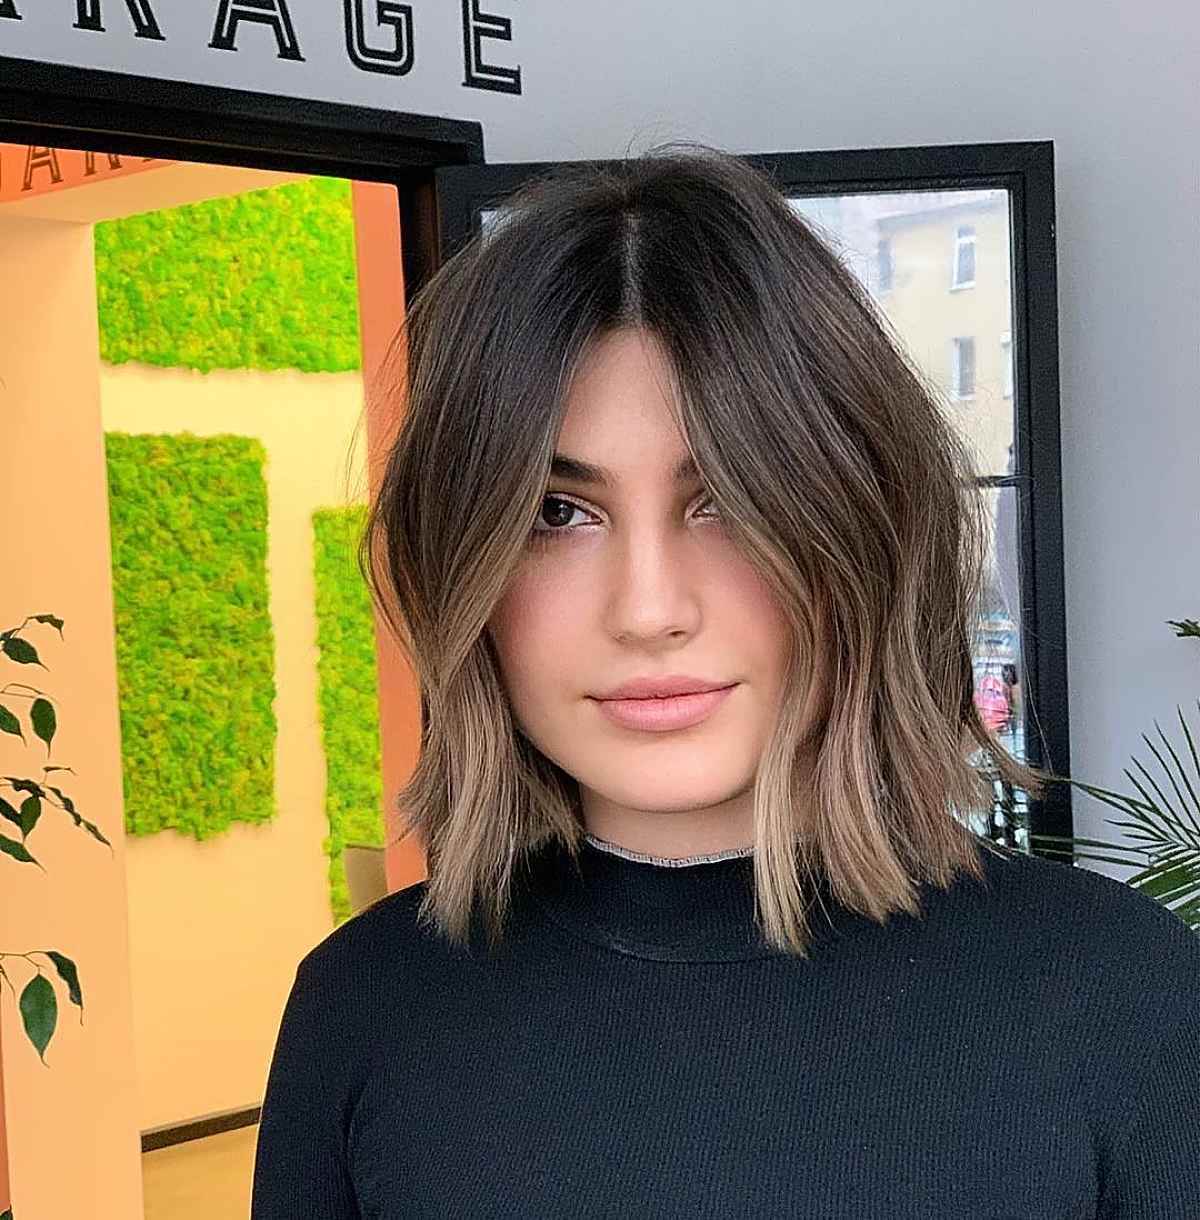 Short Black Hair with Natural-Looking Blonde Ends